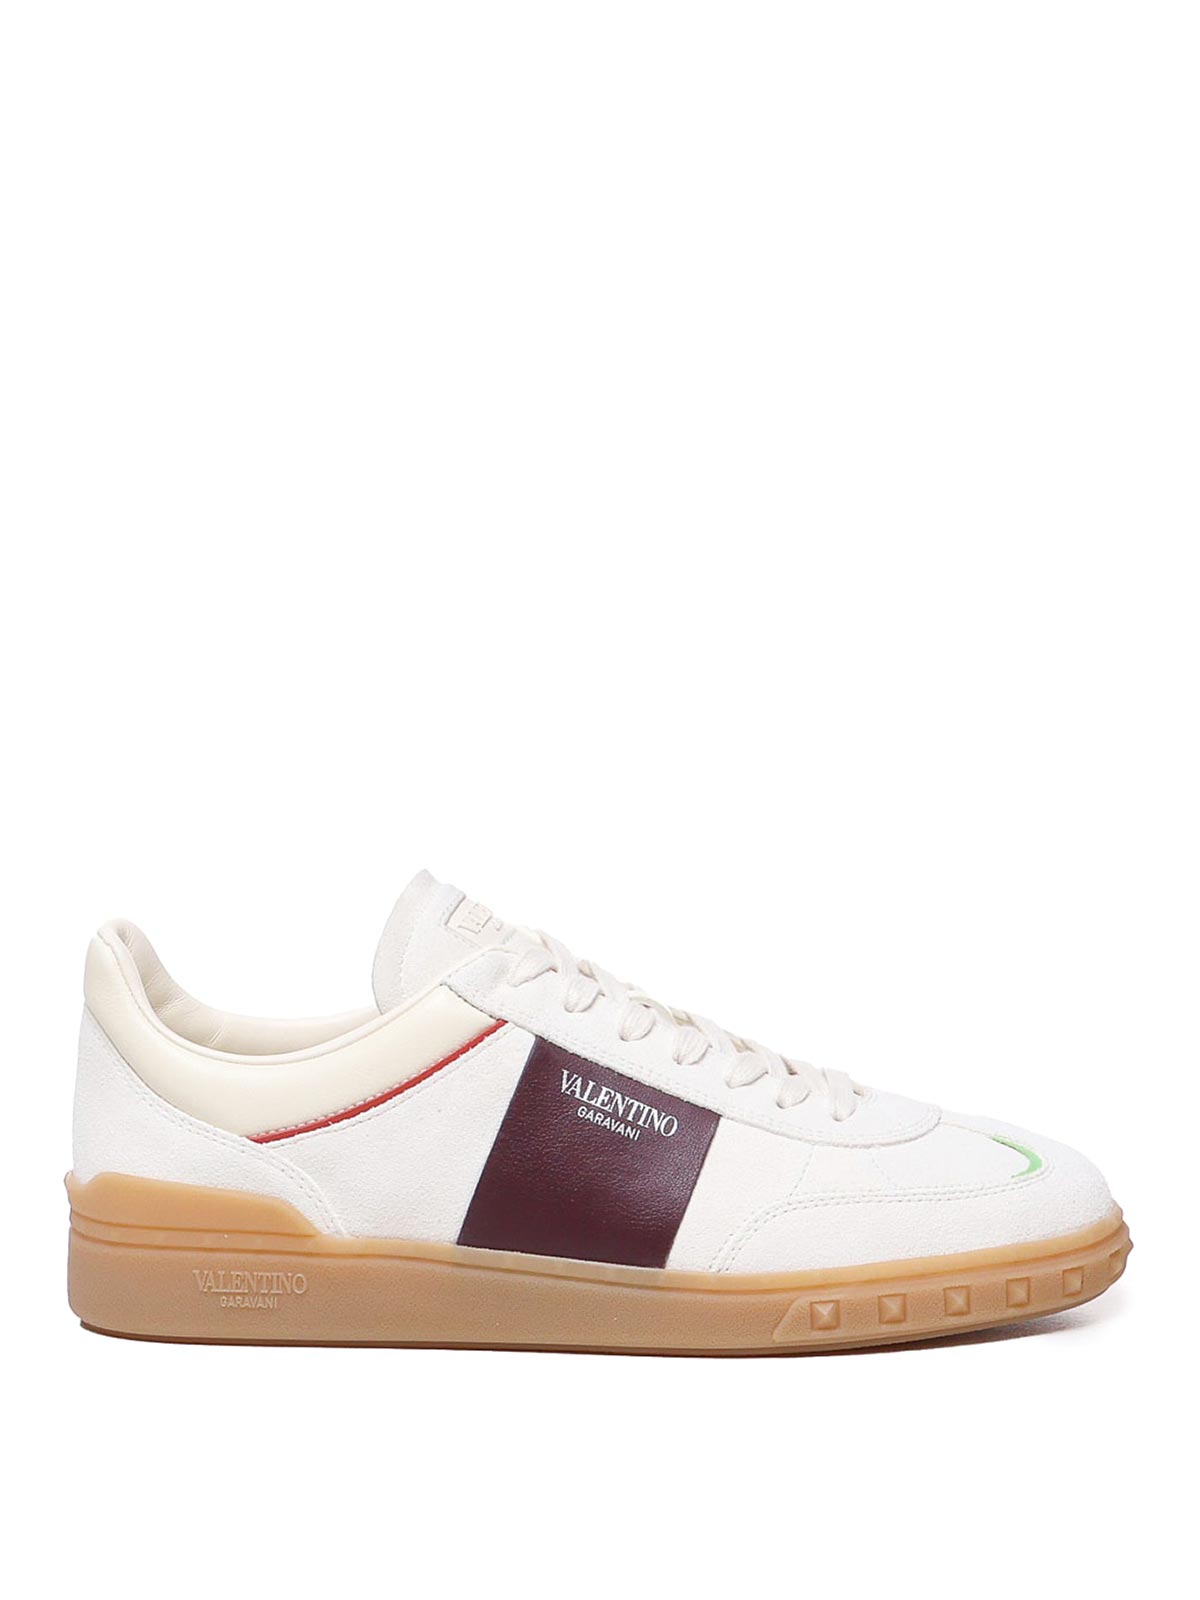 Valentino Garavani Upvillage Low Top Trainer In Split Leather And Calfskin Nappa Leather In Ivory/wine/mint/amber